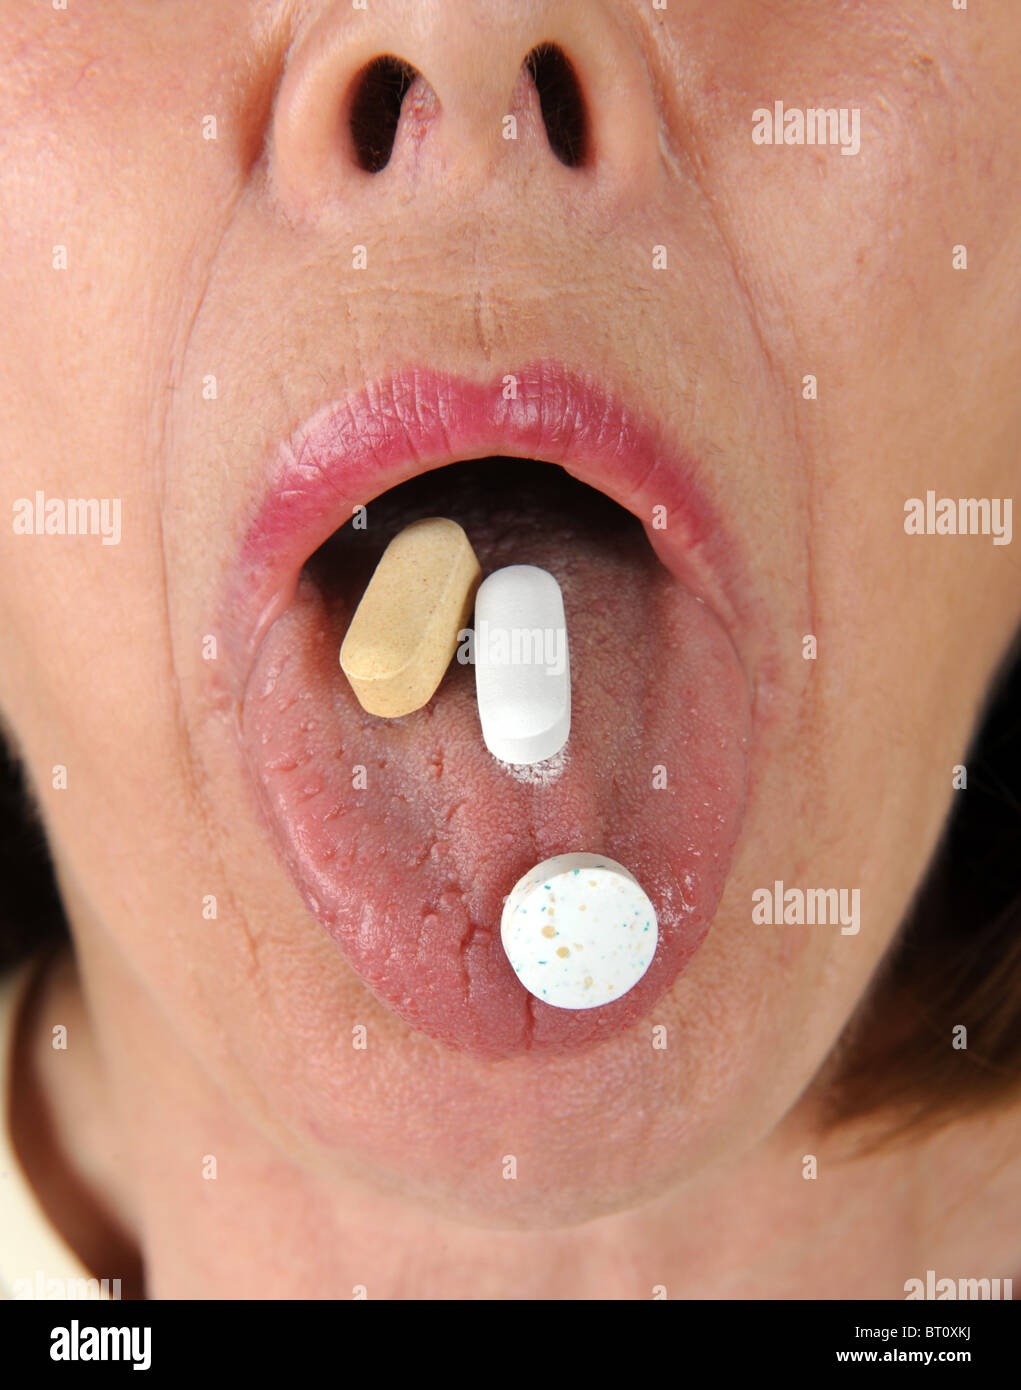 middle aged woman with vitamins on tongue Stock Photo